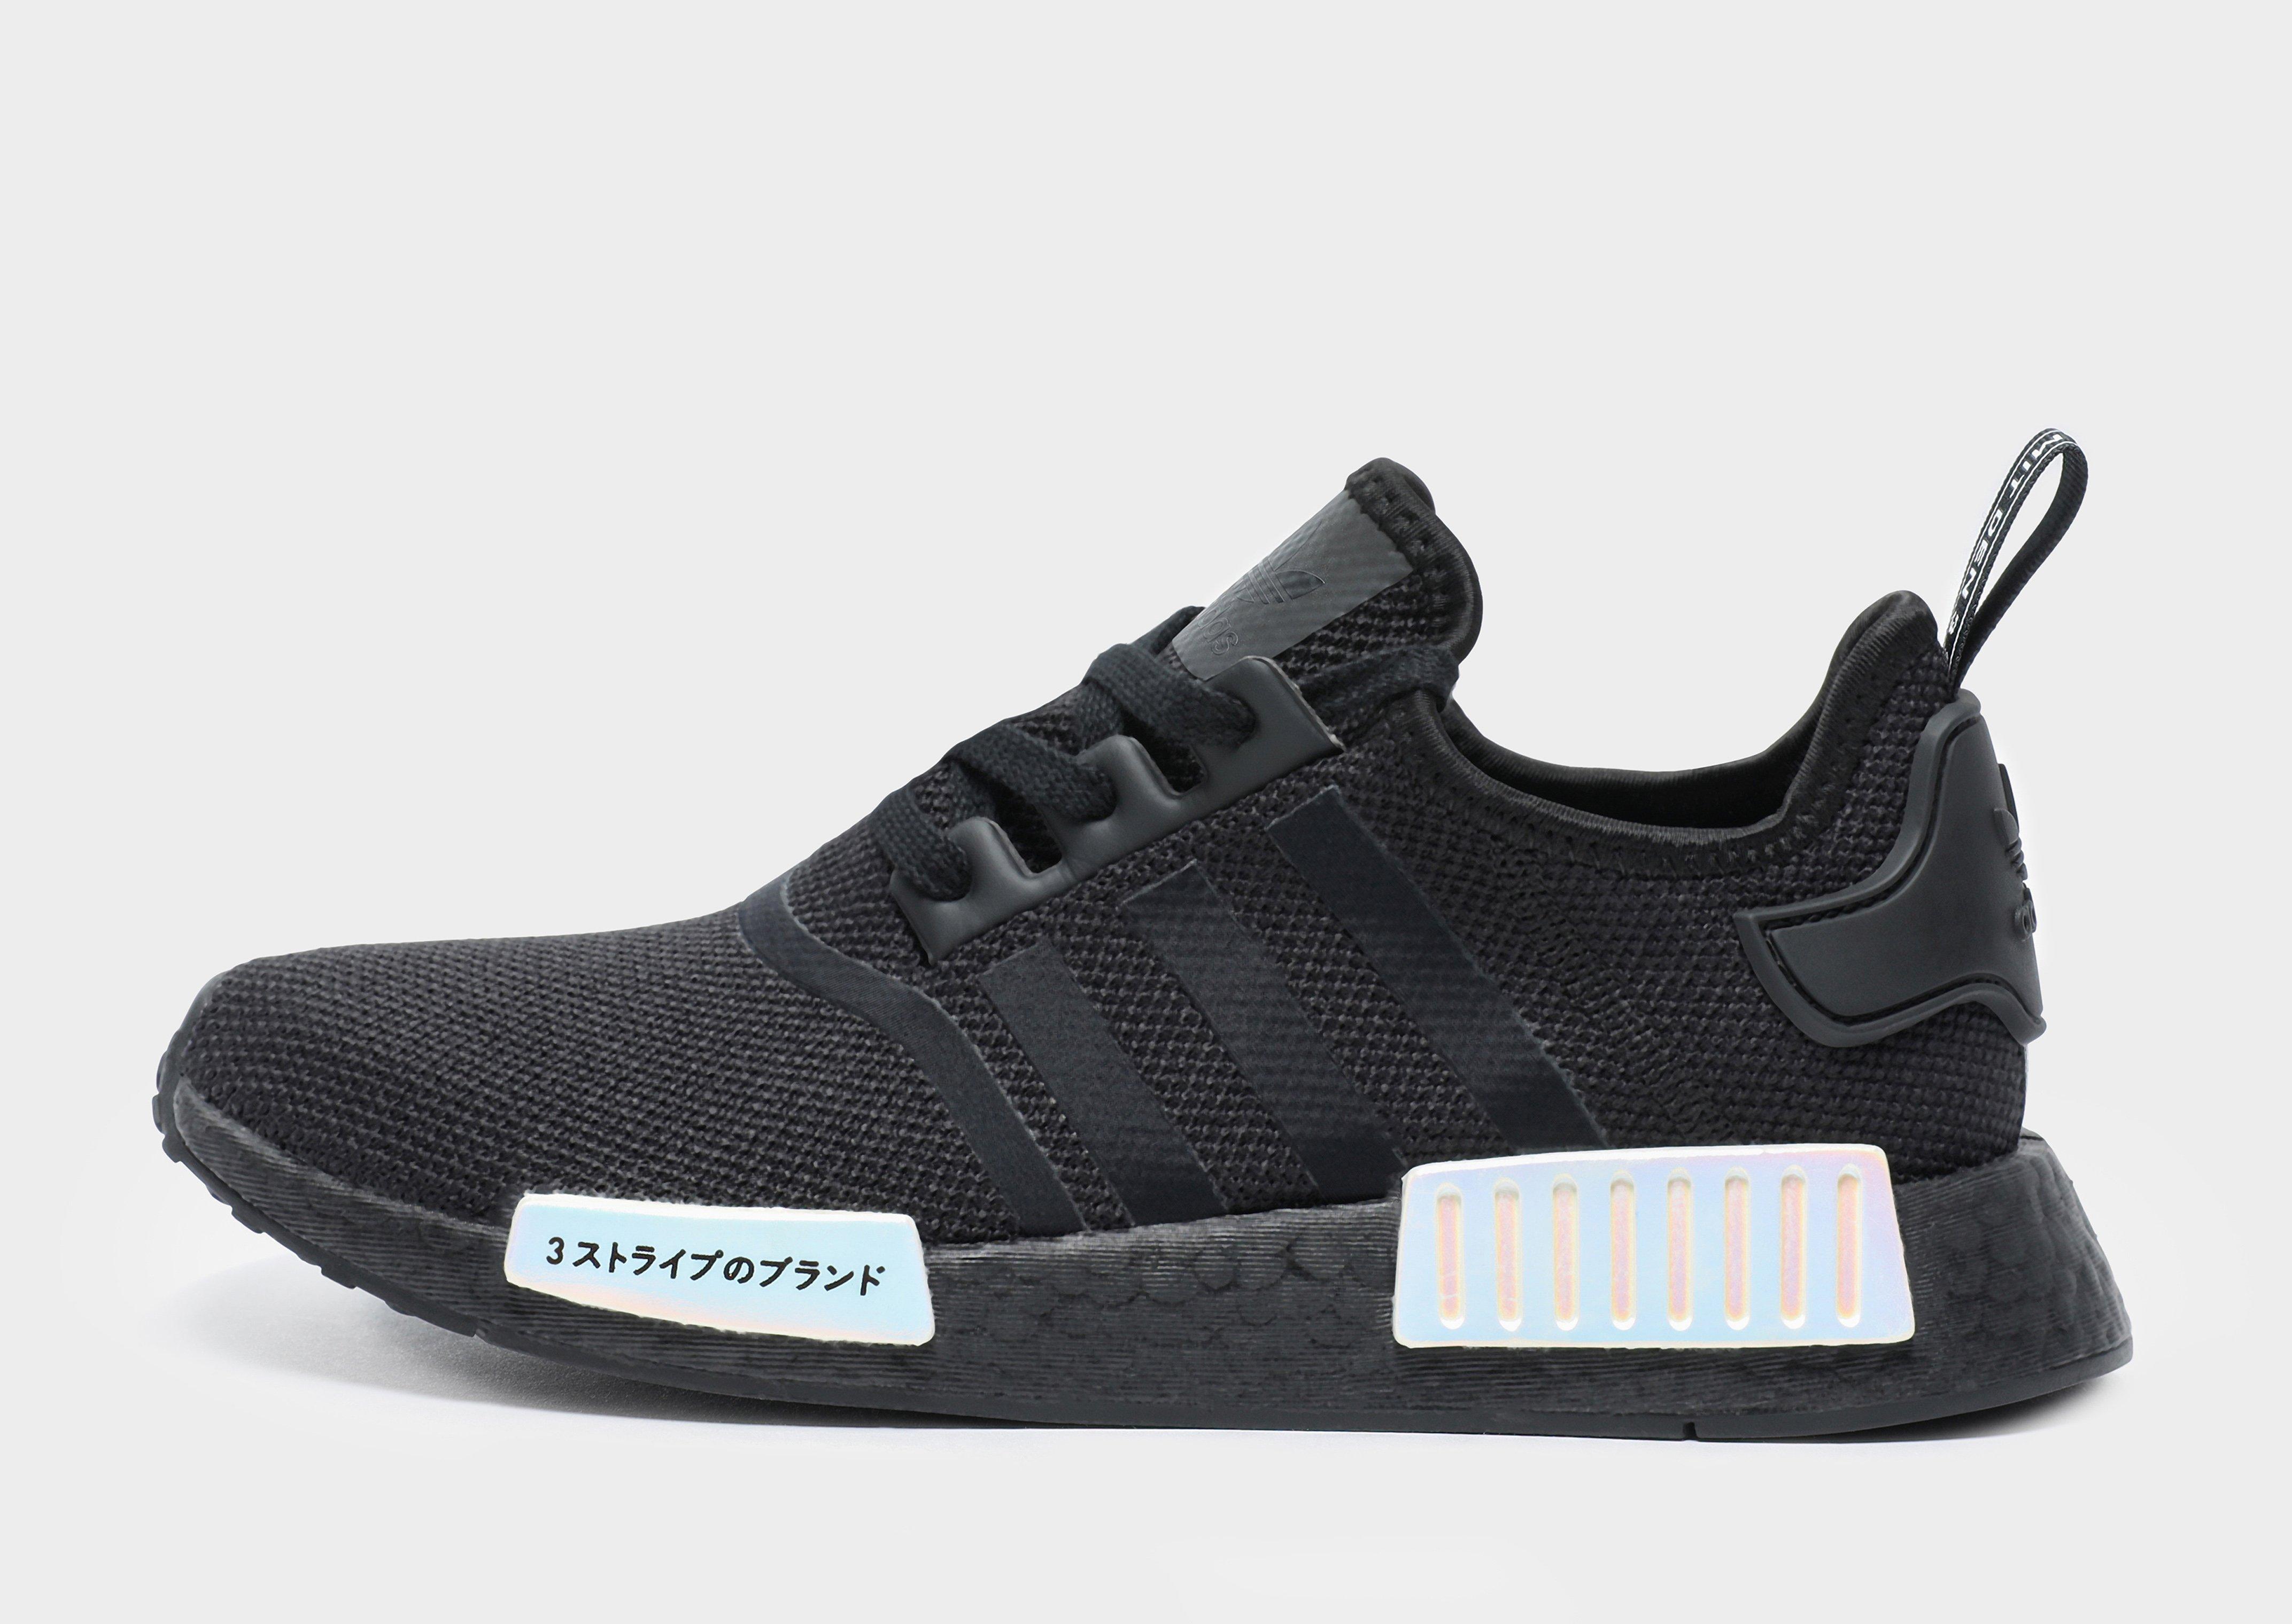 NMD R1 Iridescent Japan Women's - Only 